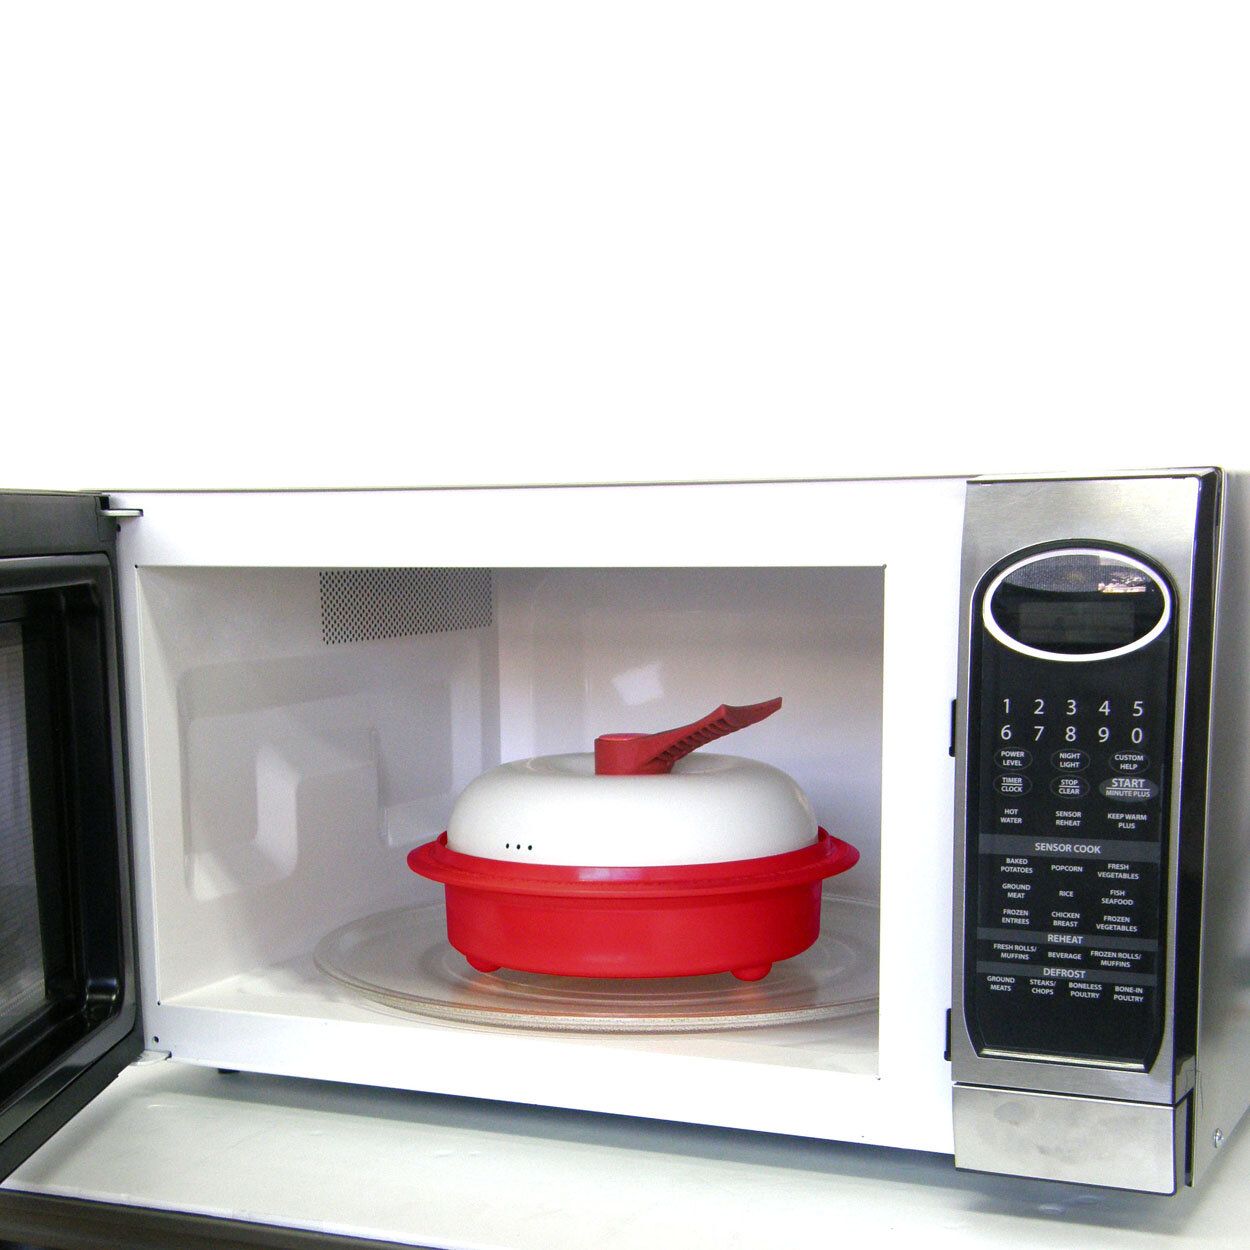 Microwave steam cooking фото 107